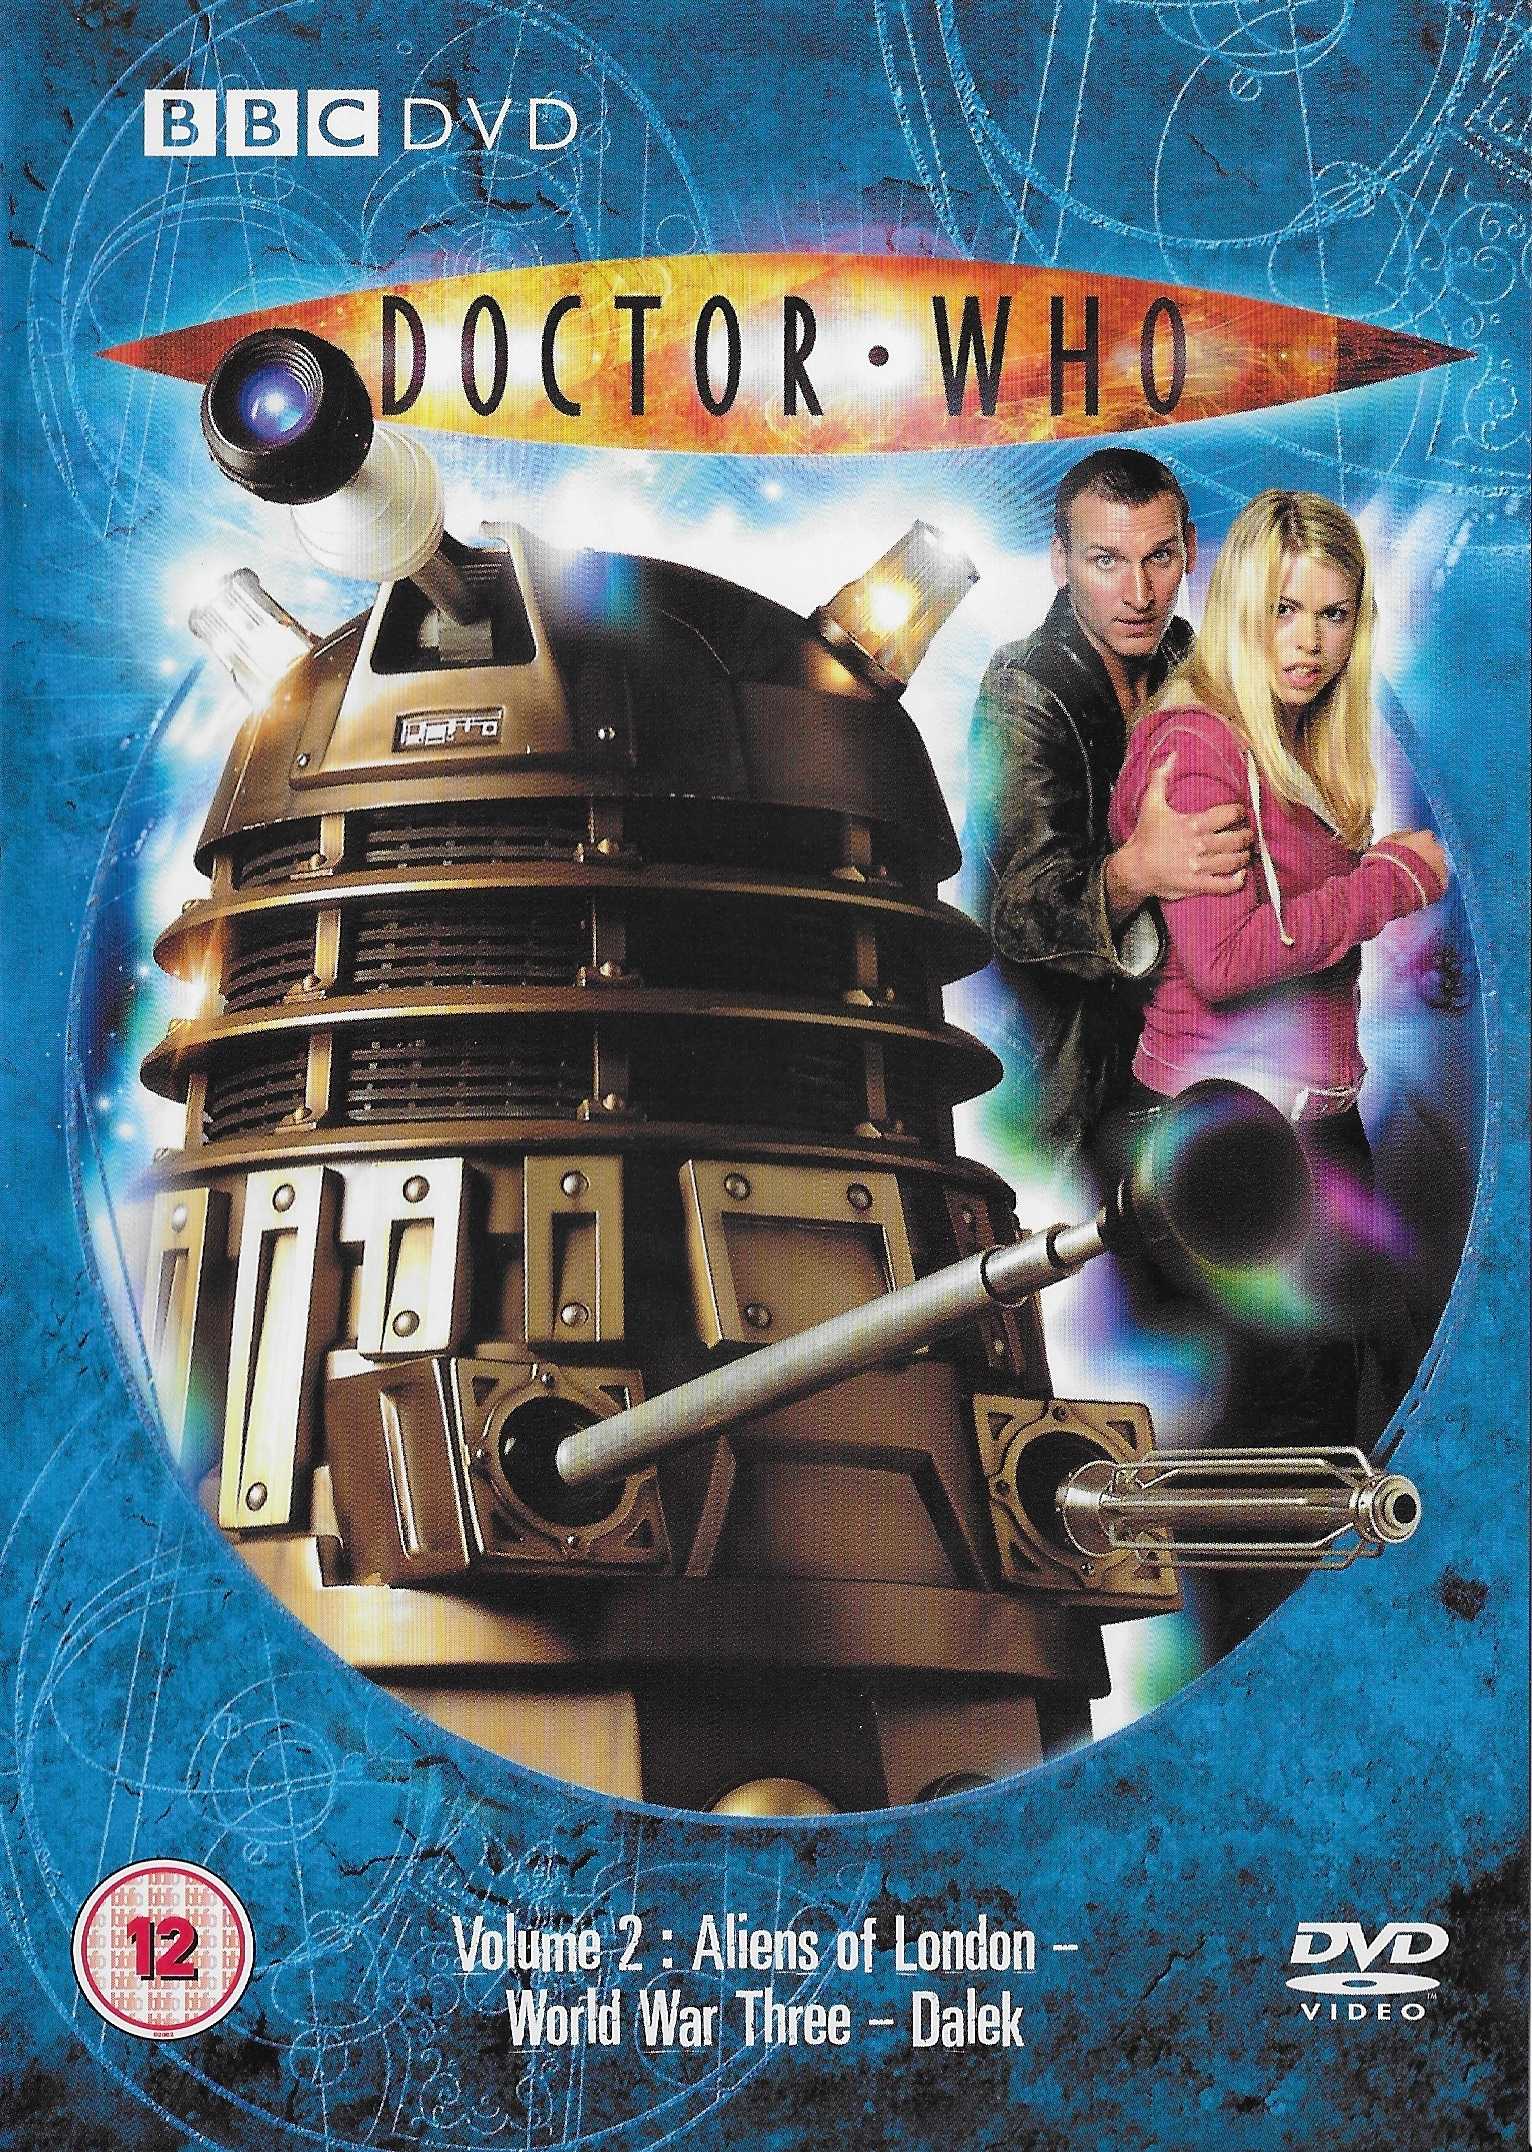 Picture of BBCDVD 1756 Doctor Who - New series, volume 2 by artist Russell T Davies / Robert Shearman from the BBC dvds - Records and Tapes library